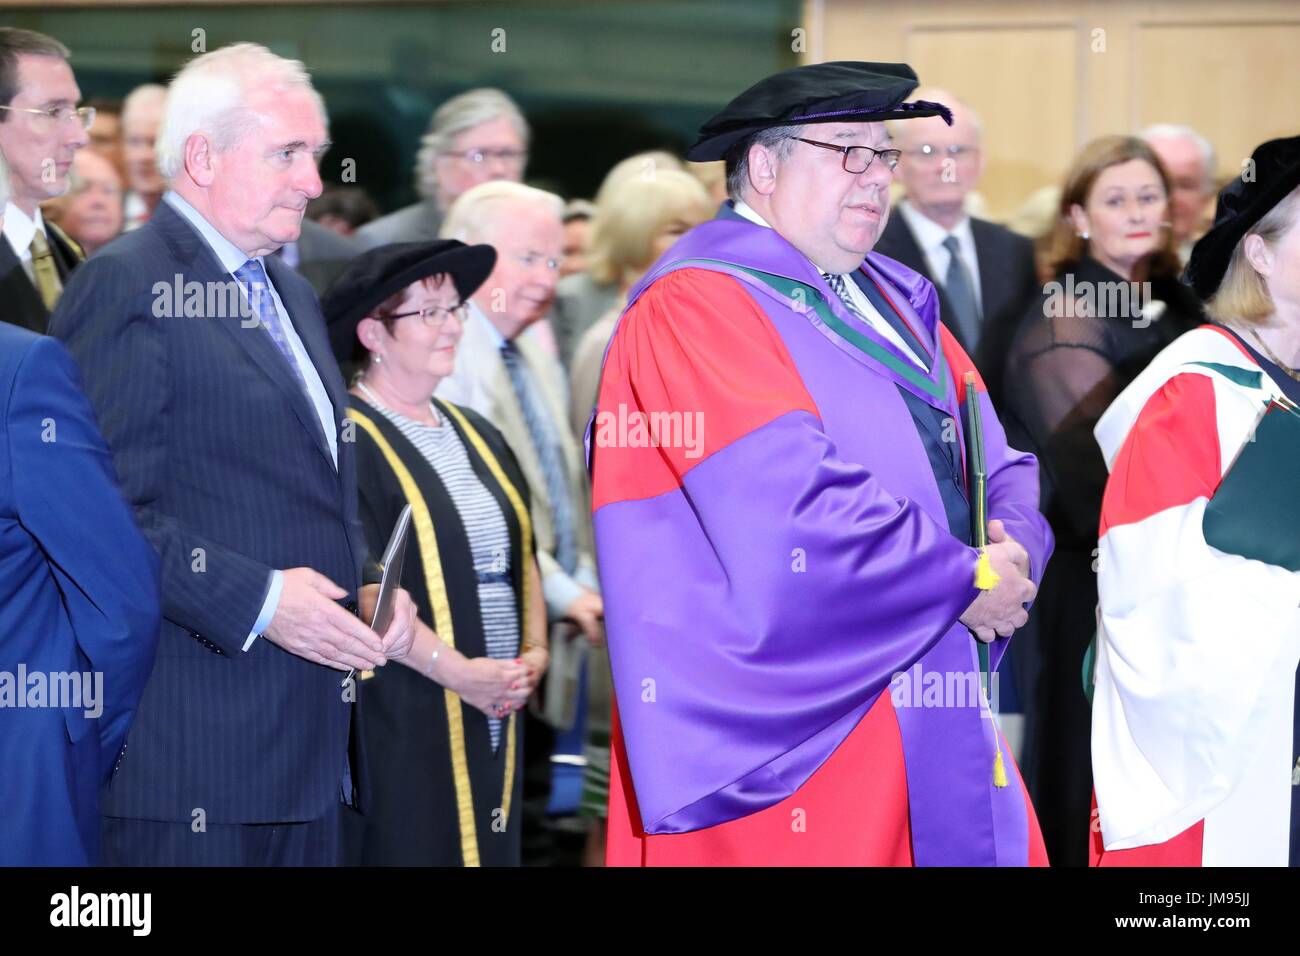 Former Taoiseach Brian Cowen receives an honorary degree from the National University of Ireland at Dublin Castle. Stock Photo